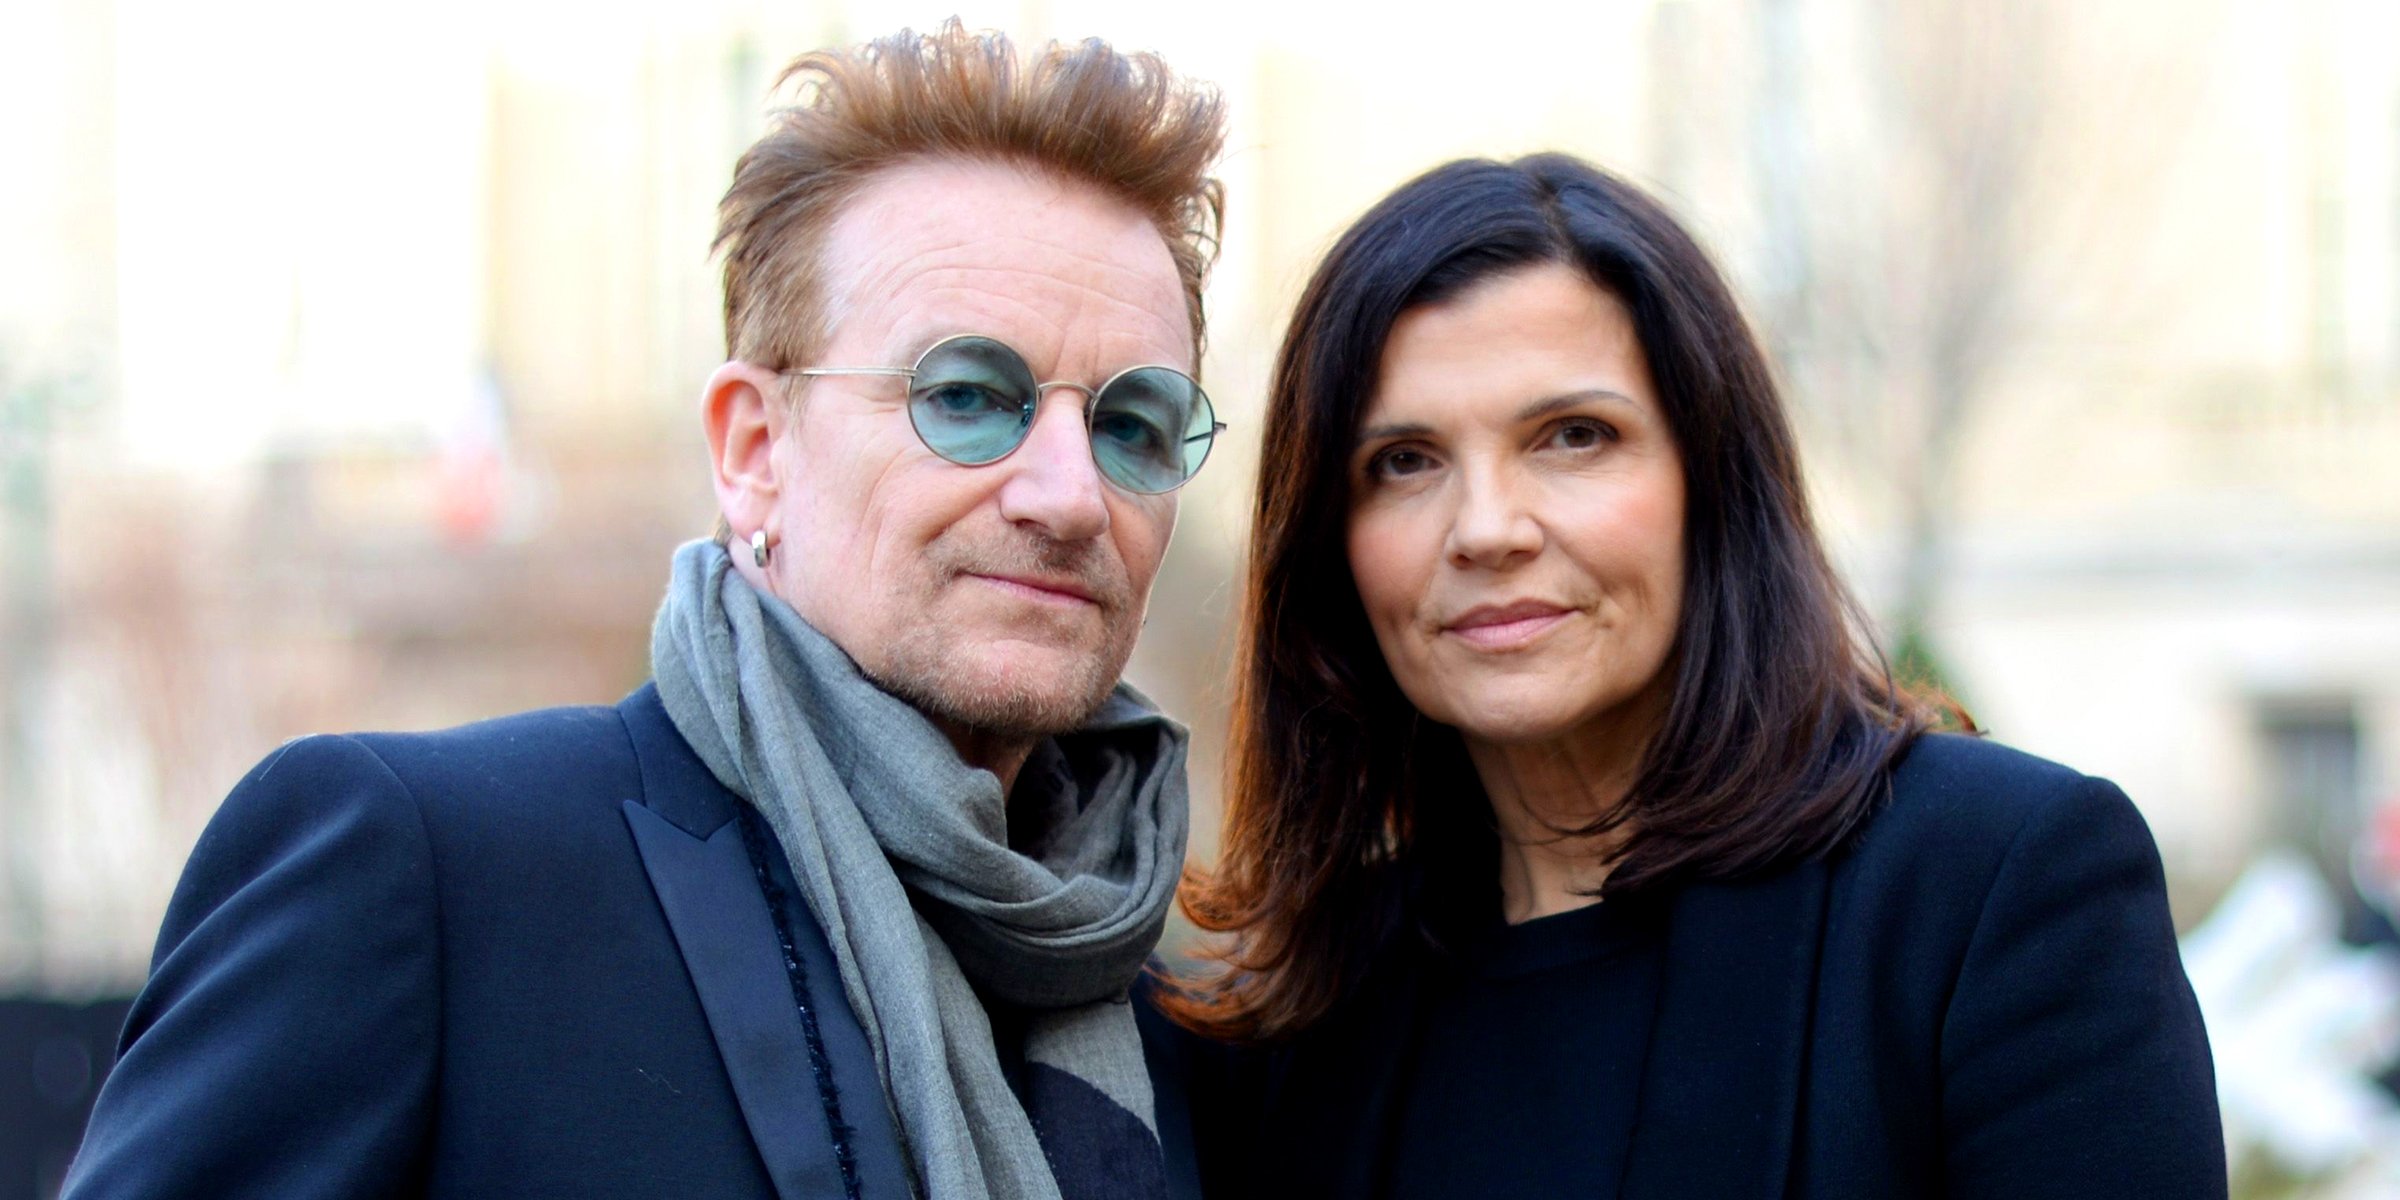 Bono and Ali Hewson | Source: Getty Images